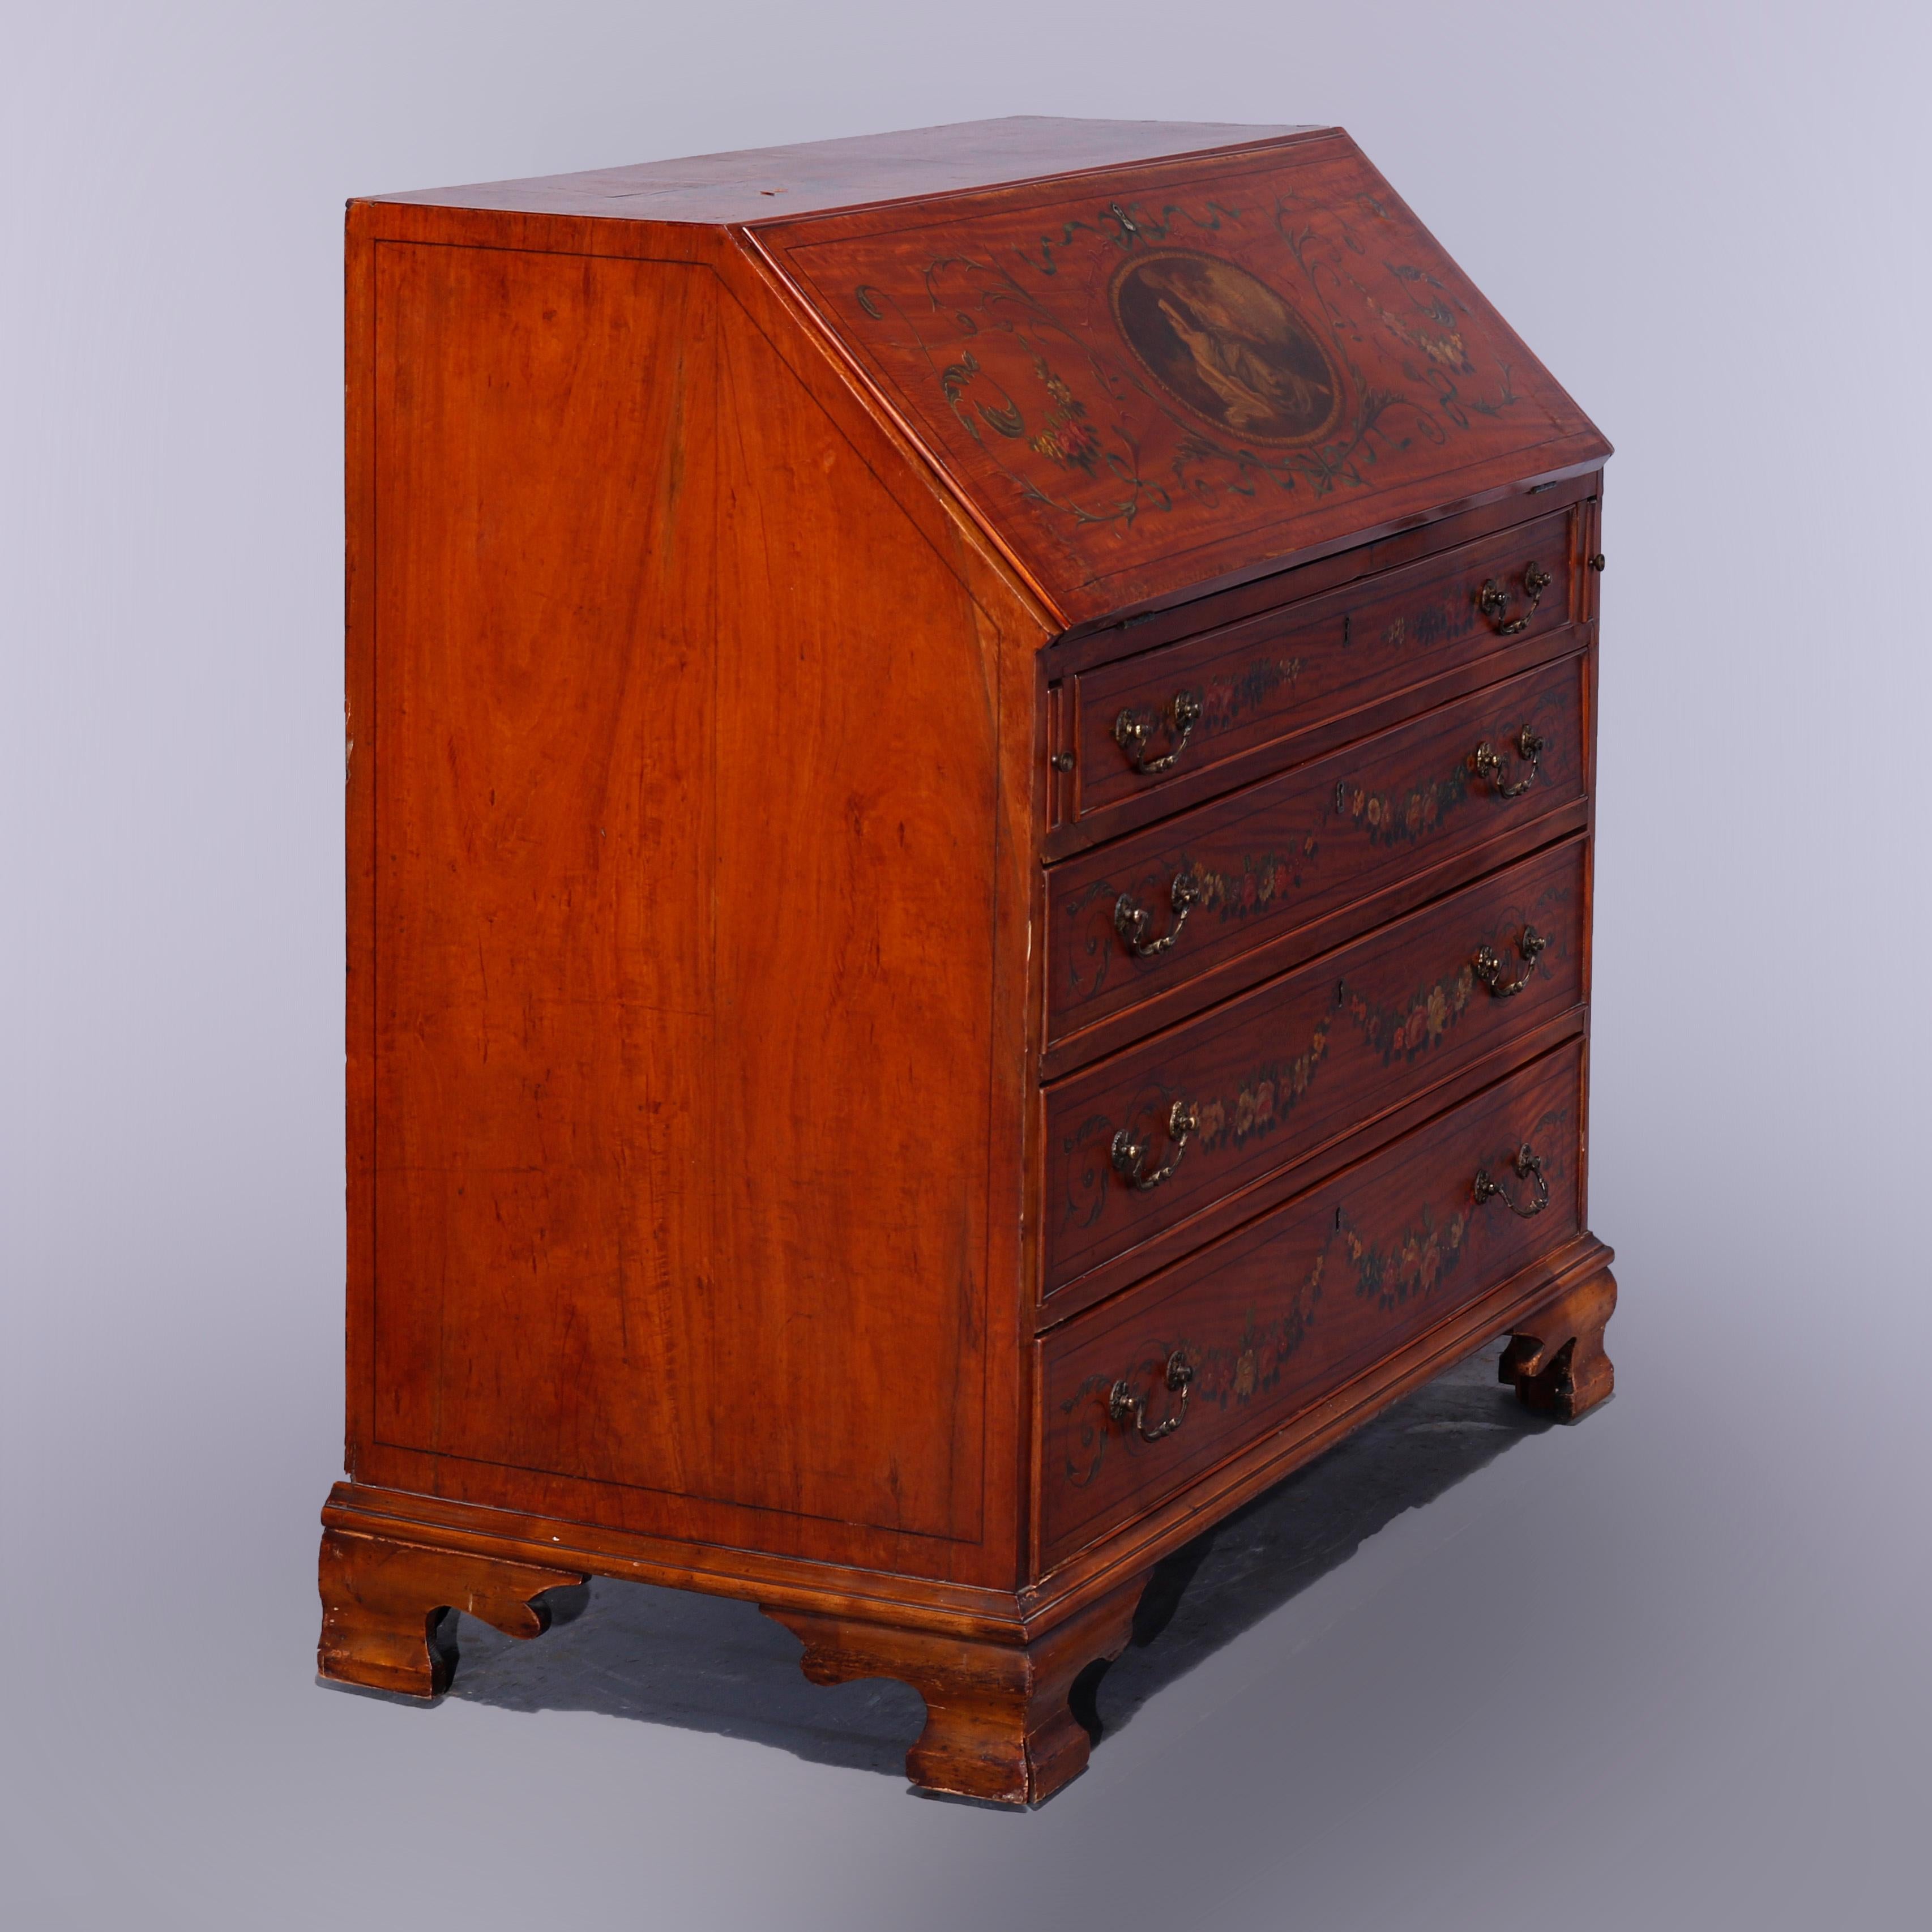 Antique English Adams Decorated Satinwood Drop-Front Desk, 18th-19th C For Sale 10